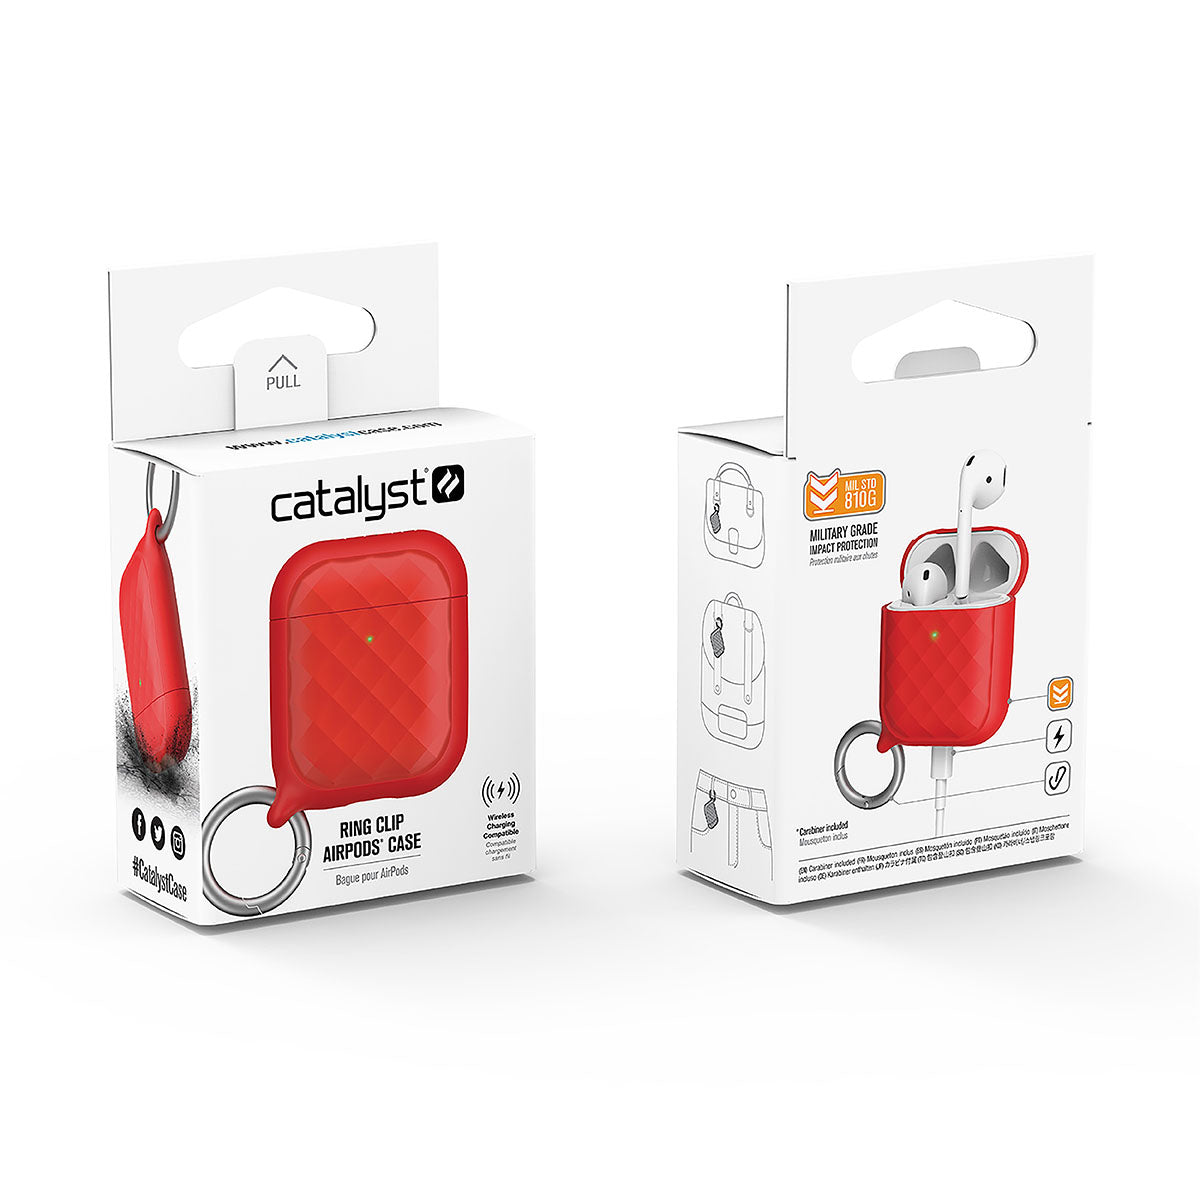 Catalyst airpods gen2/1 case ring clip carabiner showing the front and back of the case